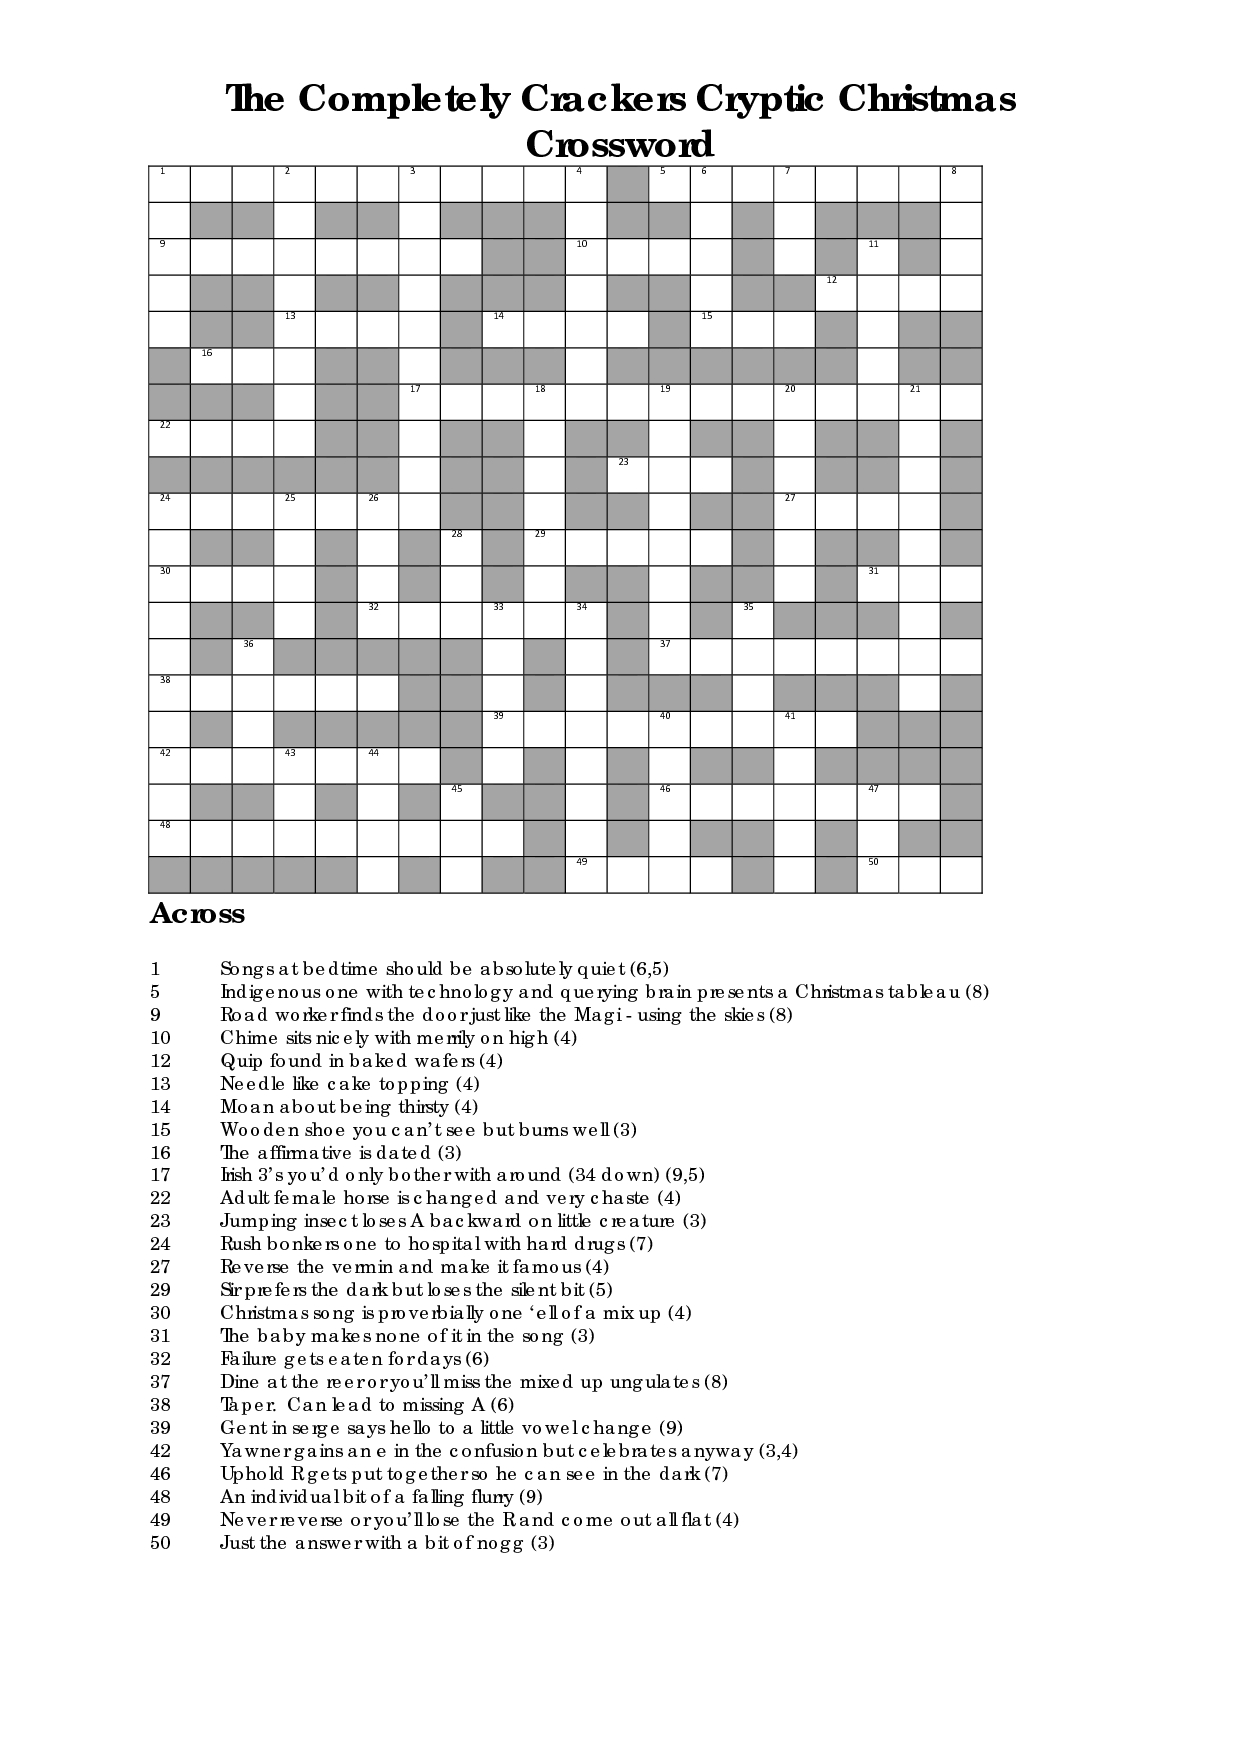 Christmas Crossword Puzzles To Print | The Completely Crackers - Printable Cryptic Crossword Puzzles Free